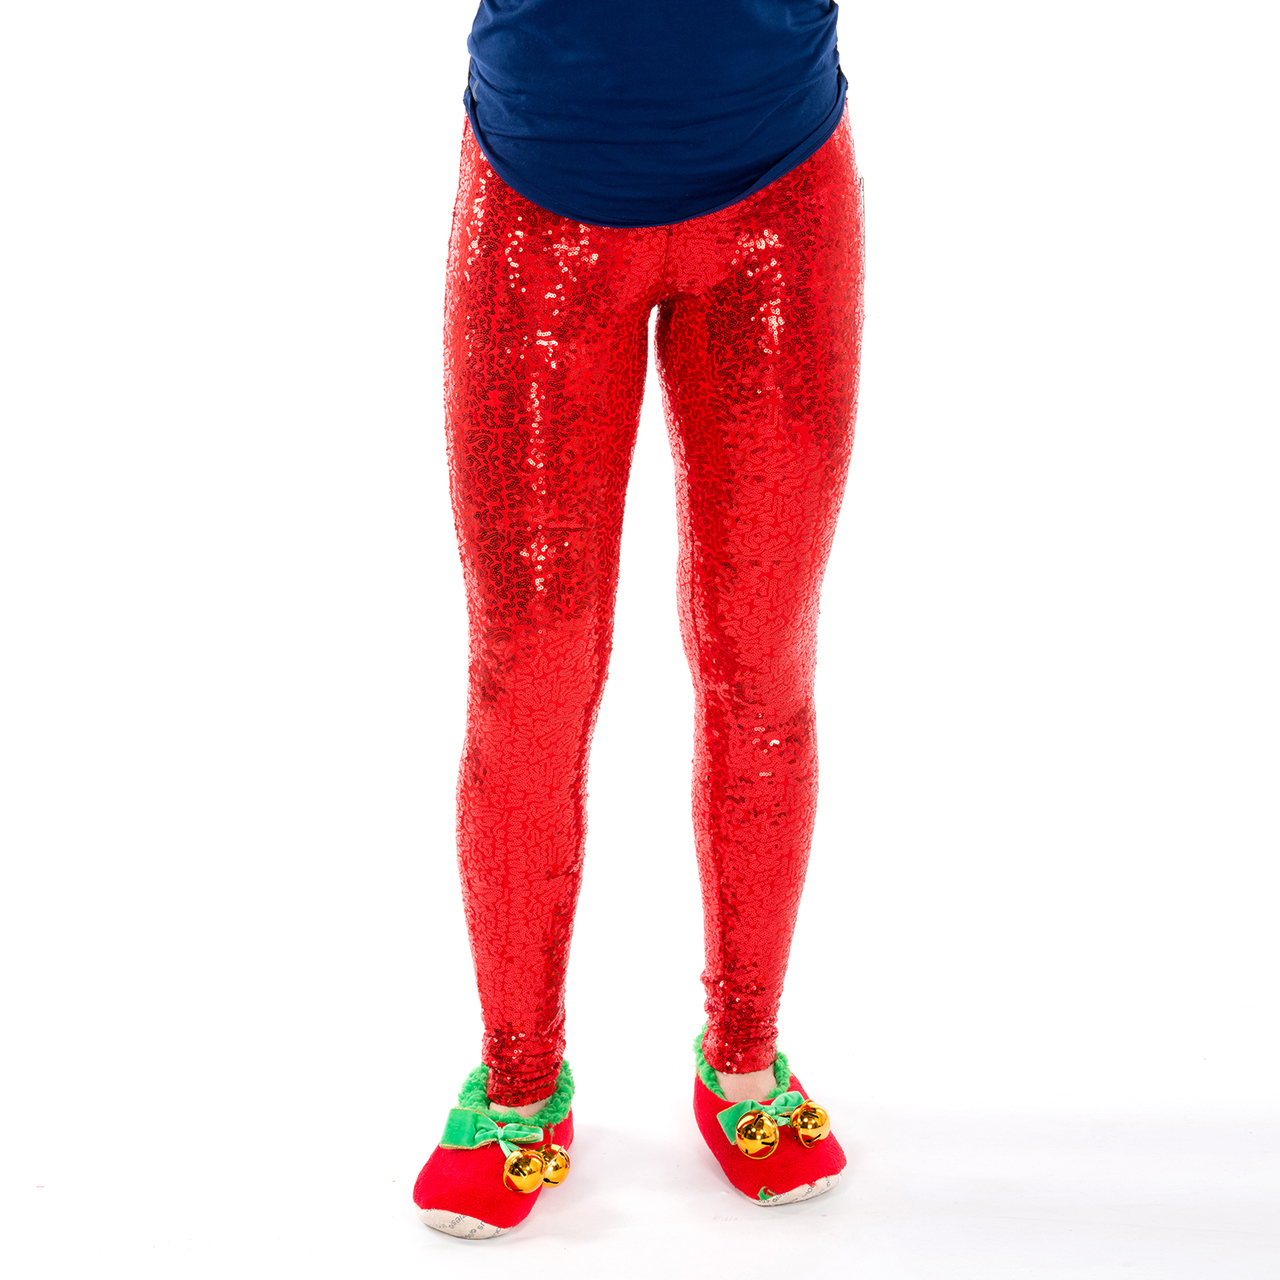 https://cdn11.bigcommerce.com/s-c9a80/images/stencil/original/products/4418/12981/red_sequin_tights_front__11185.1510773283.jpg